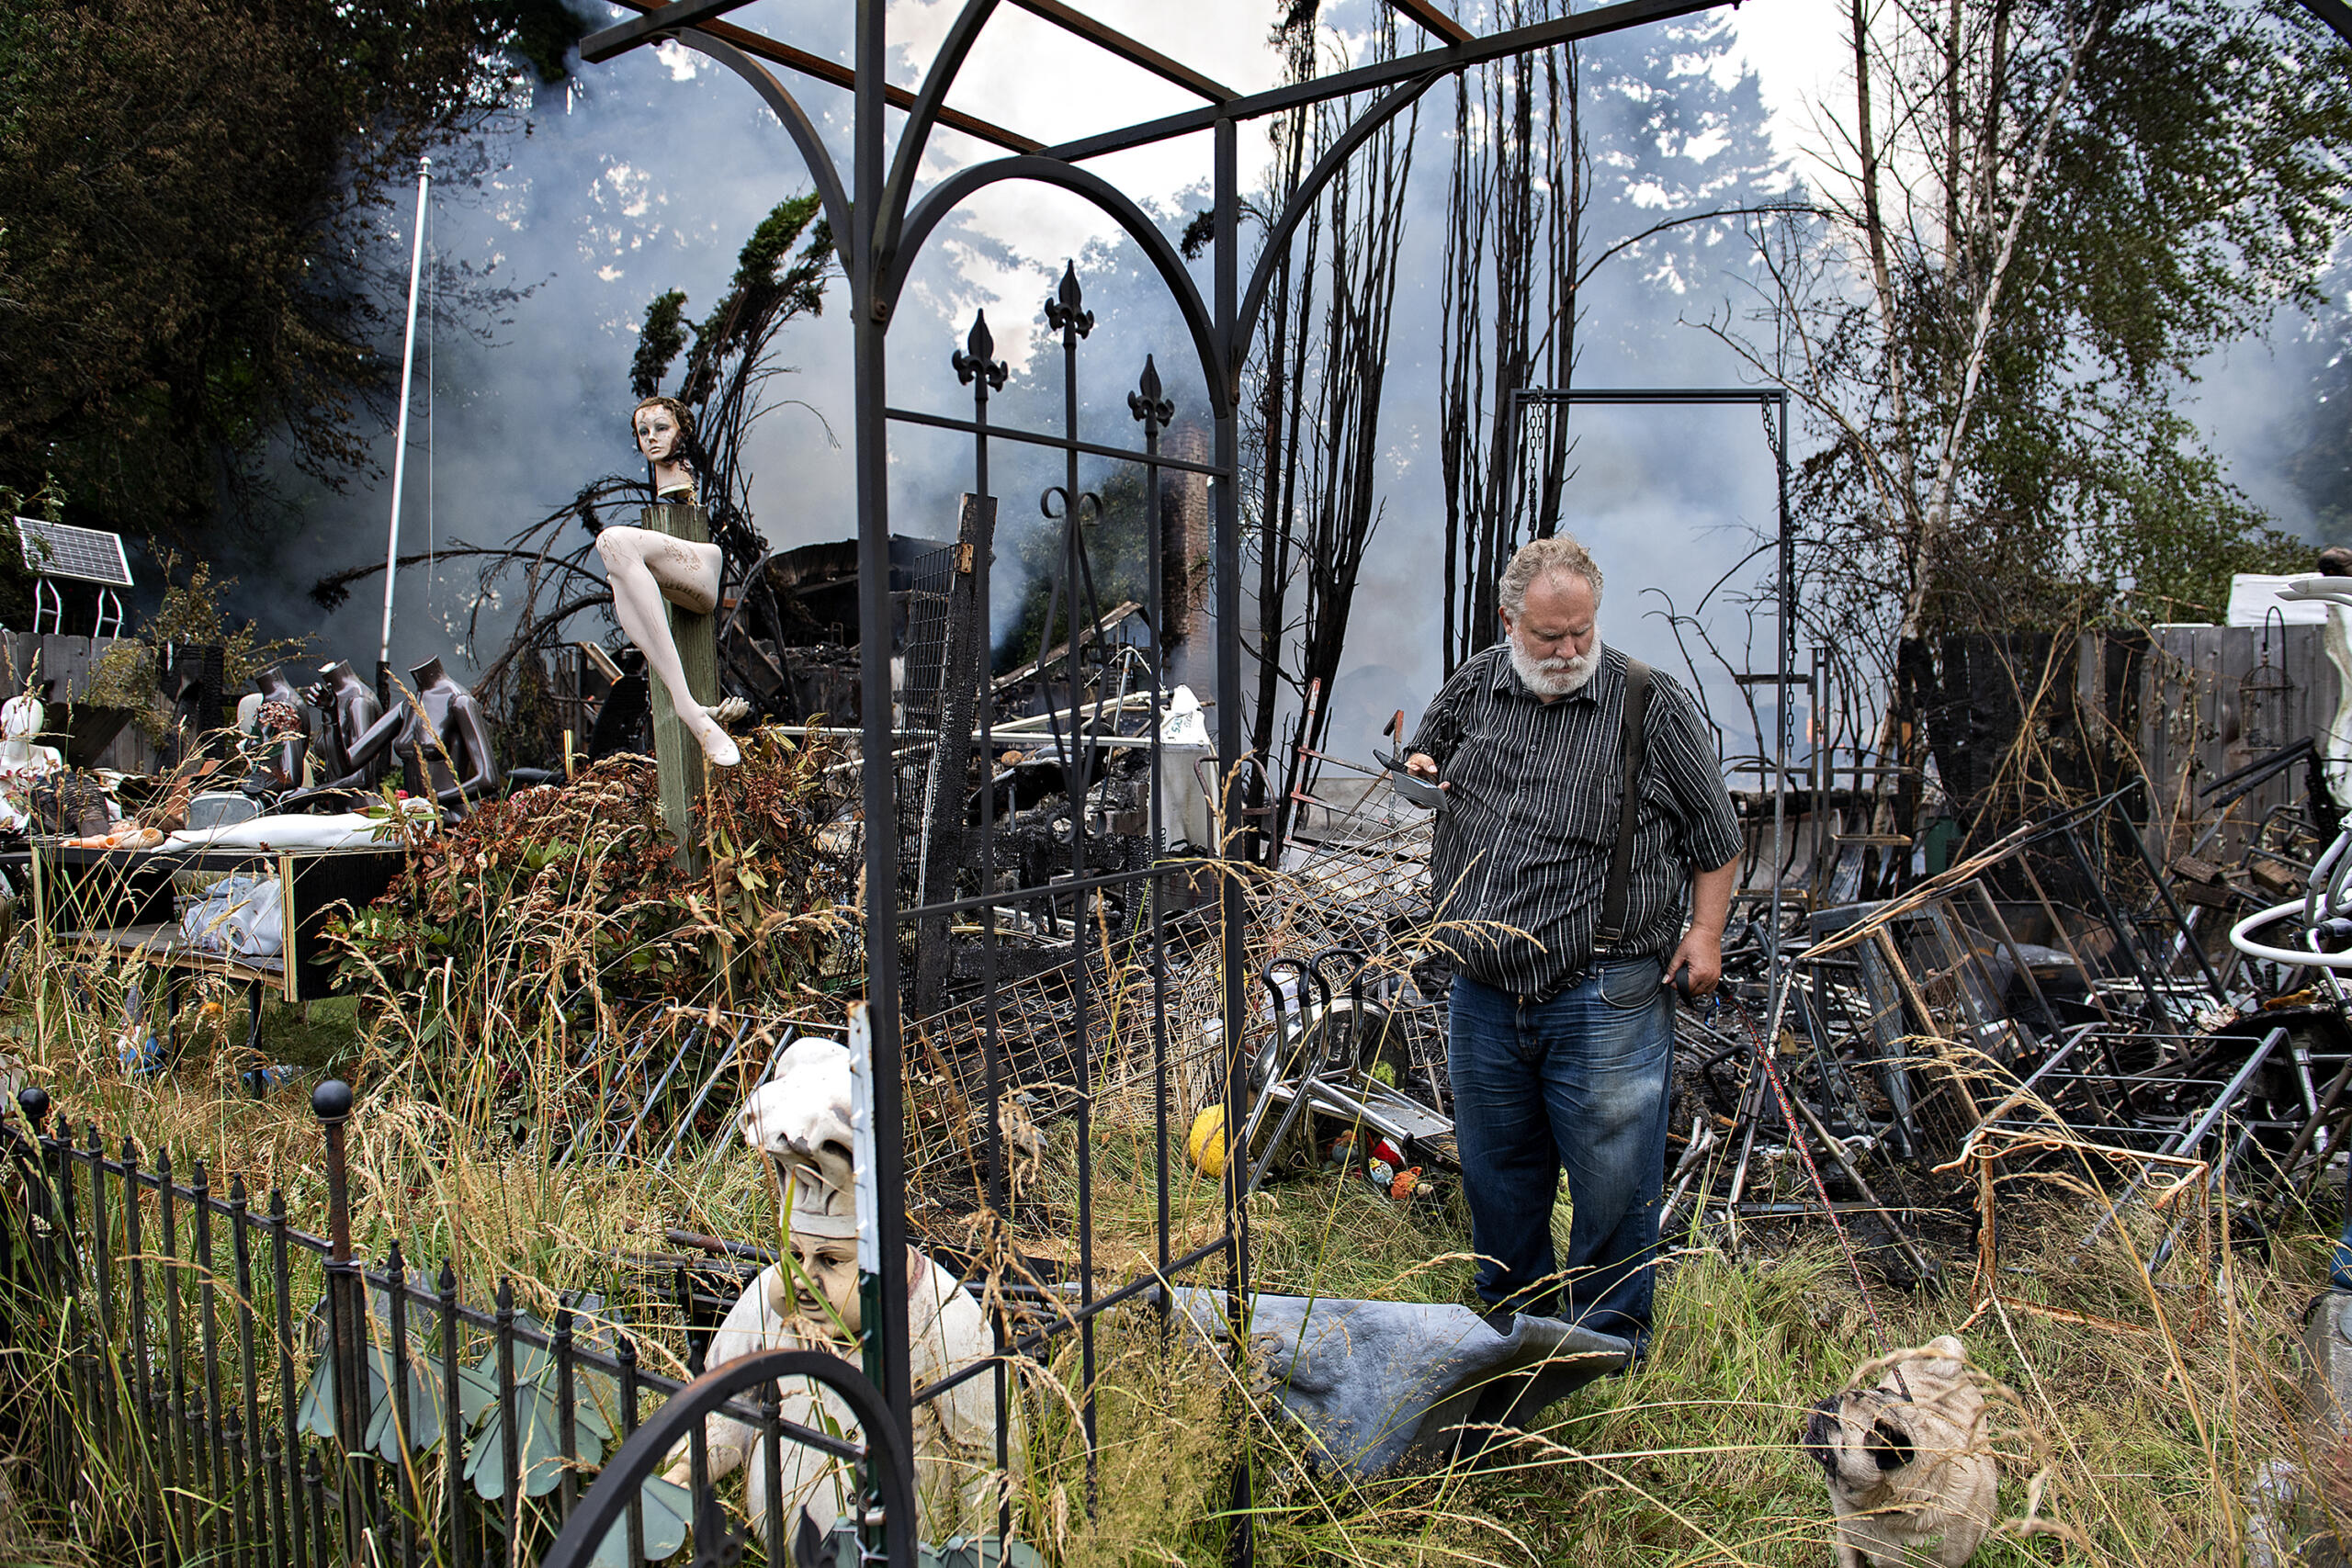 Property owner Steve Slocum surveys the fire scene with his dog, Frank, after a former church and the house next door burned down in an early morning blaze in Battle Ground on Monday, July 5, 2021. Officials said the fire could've been sparked by fireworks and no injuries were reported.